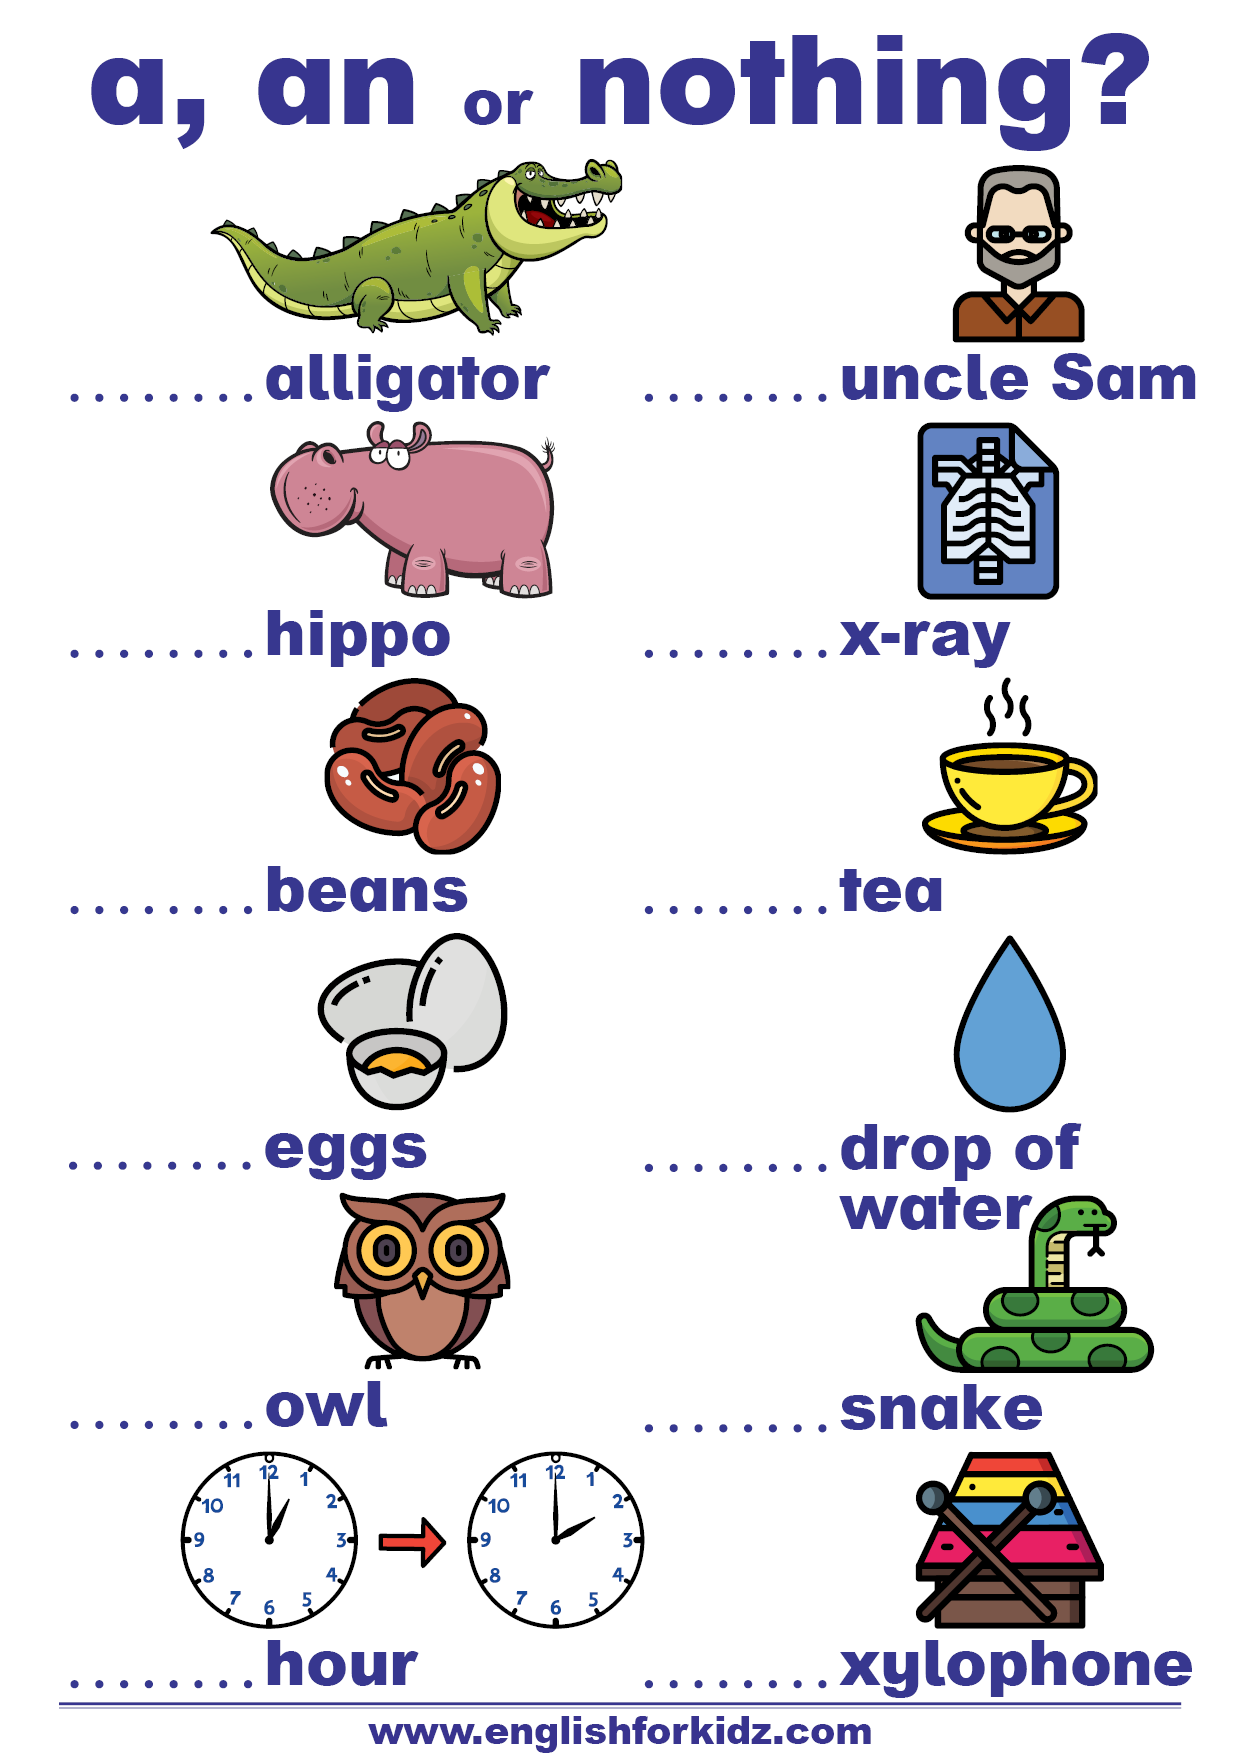 English For Kids Step By Step: Indefinite Articles Worksheets: A Or An?